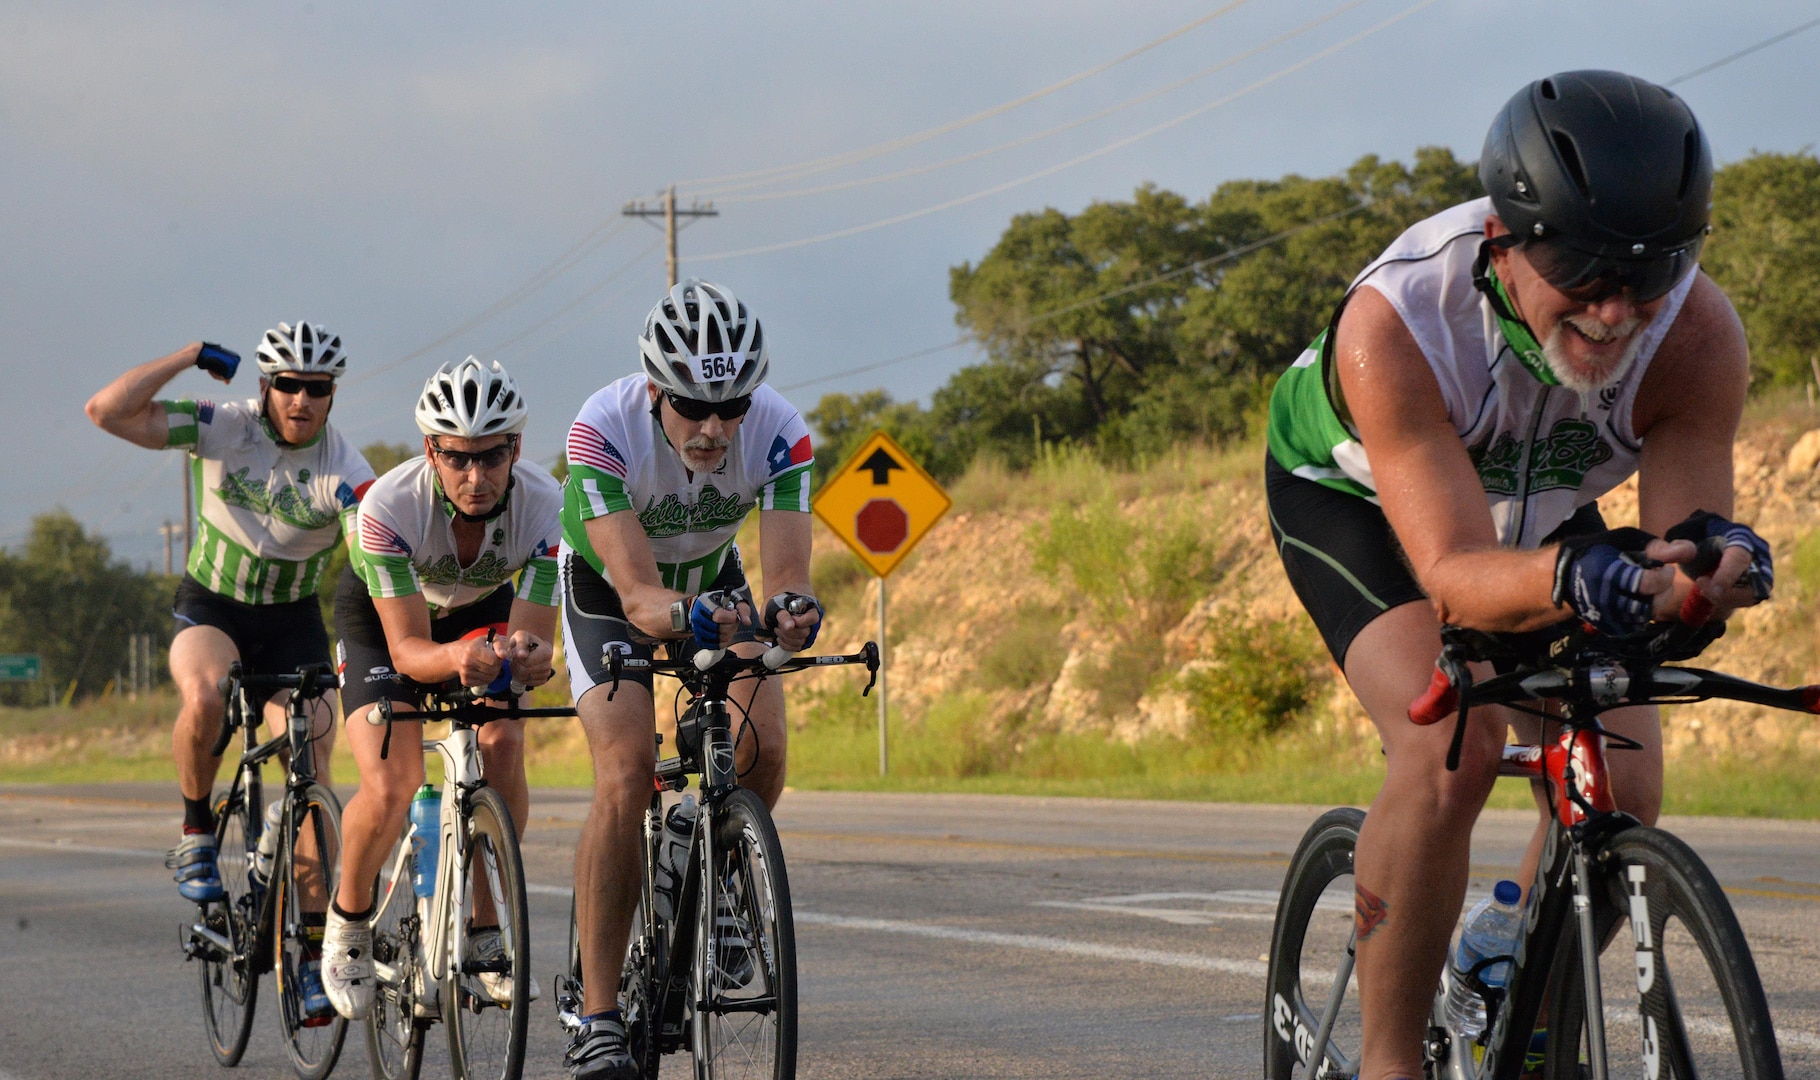 Competitors ride toward the next transition point during the 22-mile bike race portion of the annual Rambler 120 competition Sept. 19, 2015 at Joint Base San Antonio Recreation Park at Canyon Lake. The Rambler 120, which is hosted by the 502nd Force Support Squadron, features four- and eight-person teams that engage in a friendly, but hard-fought, competition that challenges participants with a 22-mile bike race, 6-mile run, 2-mile raft race and a mystery event. (U.S. Air Force photo by Your Olivia Mendoza)